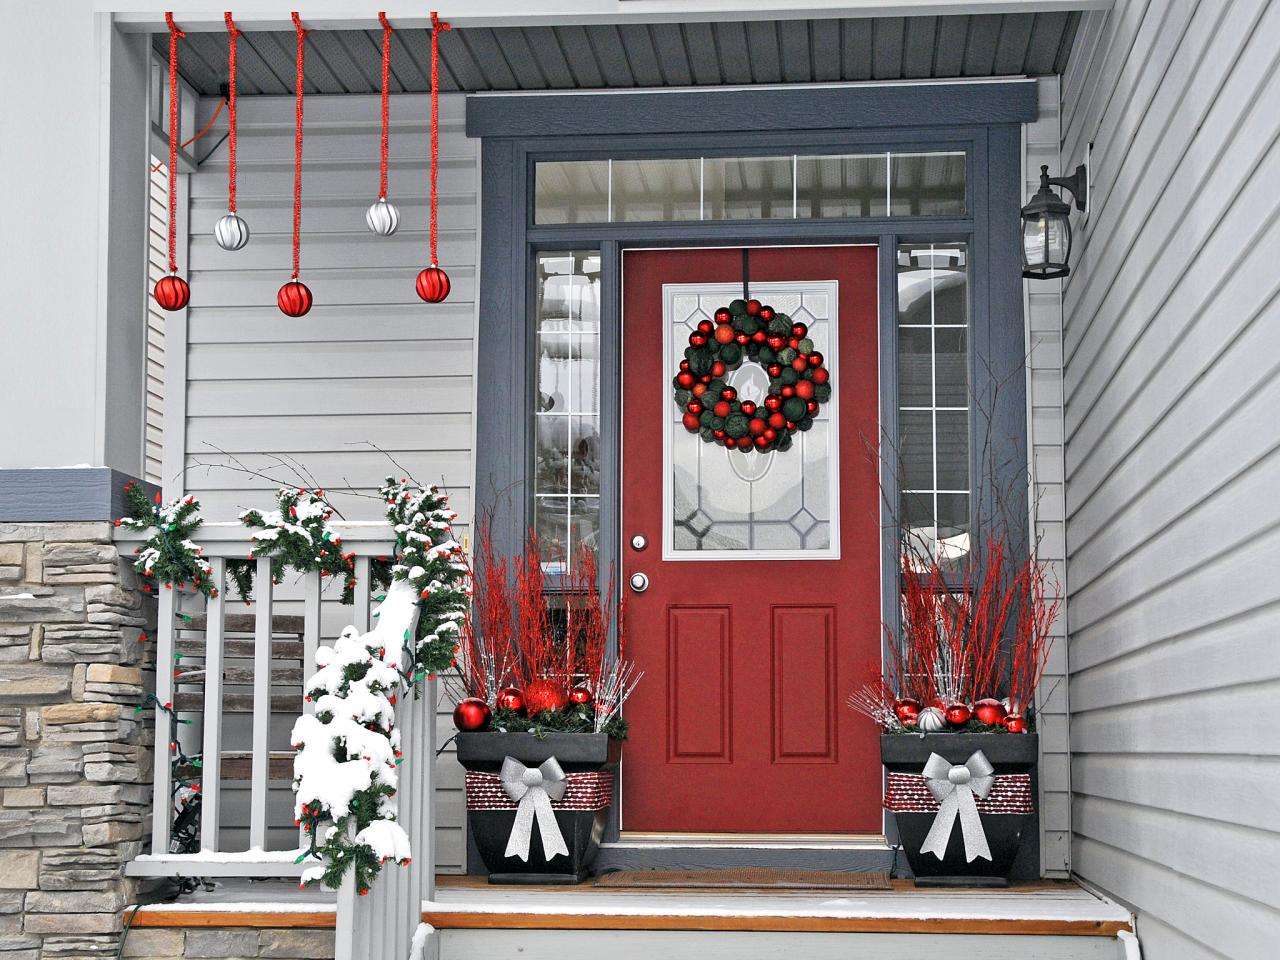 Christmas decorations in front of the house entrance online puzzle